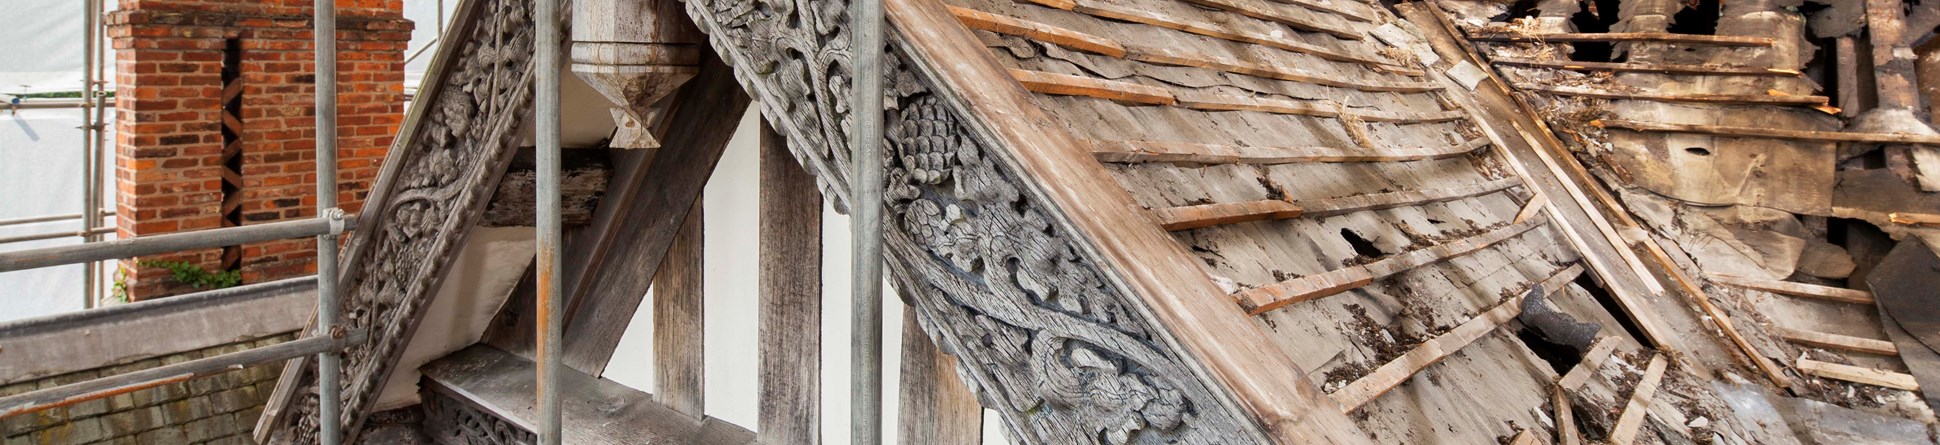 A view of decorated roof timbers at Grade II* listed Wythenshawe Hall, Manchester